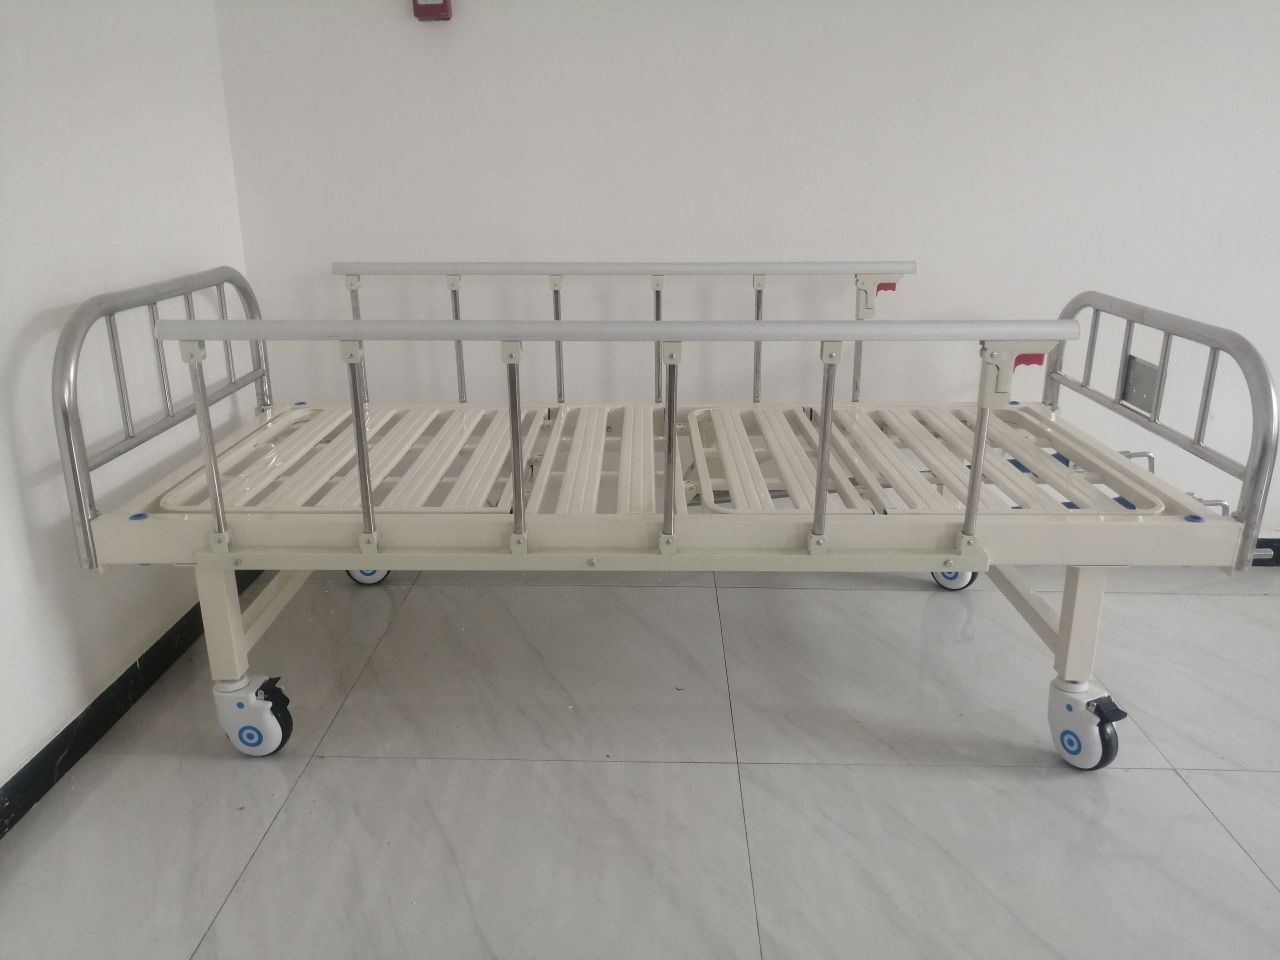 How to ensure that the number of hospital beds is sufficient and can meet the needs of patients at a low cost?